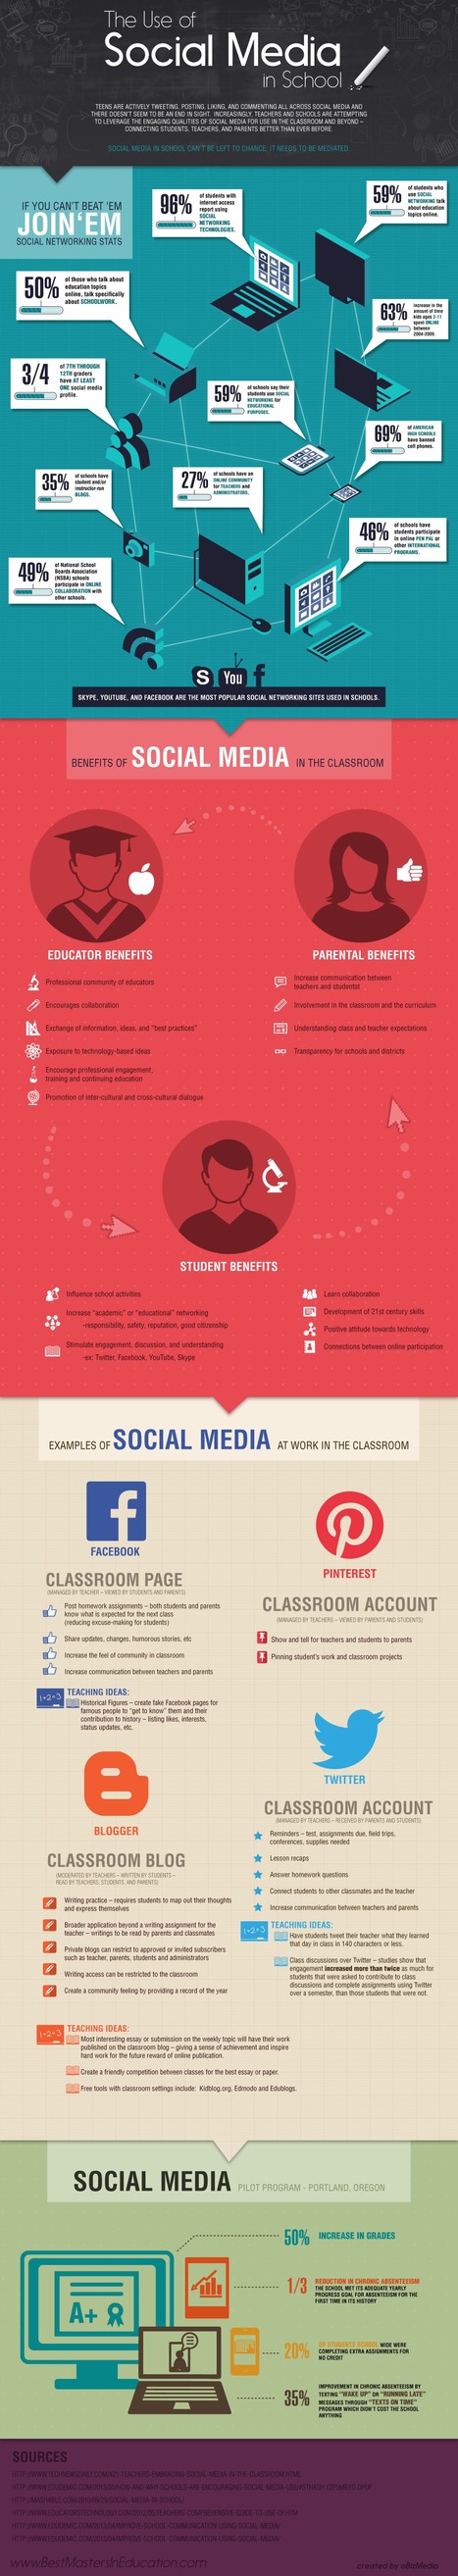 Social Media 101: Is There a Place For Social Media in Classrooms? [Infographic] | Education 2.0 & 3.0 | Scoop.it